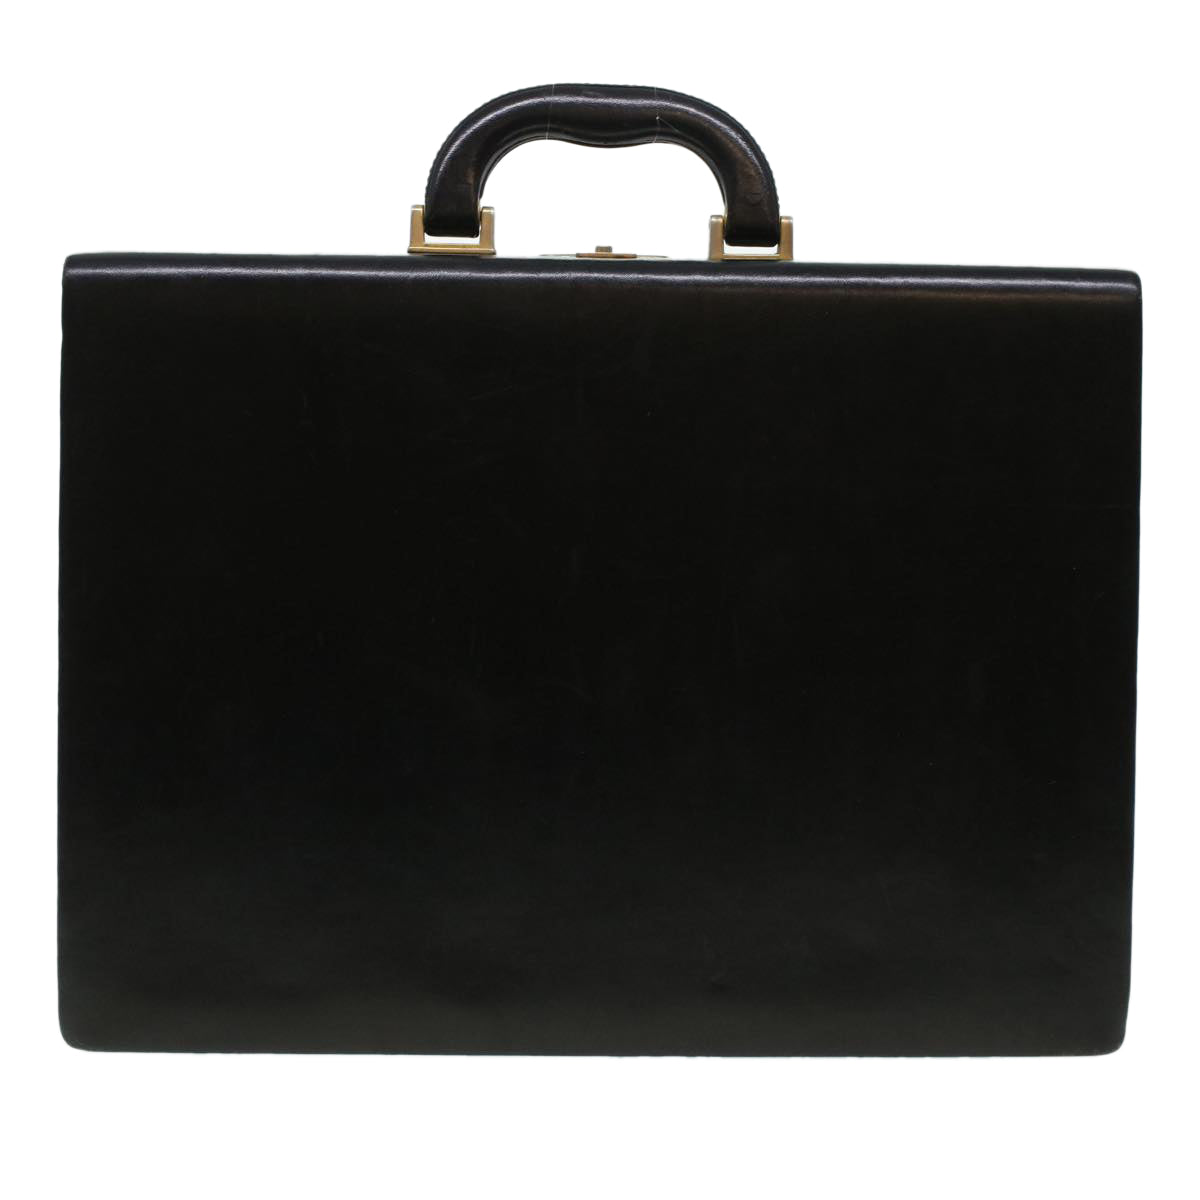 BALLY Business Bag Leather Black Auth bs5470